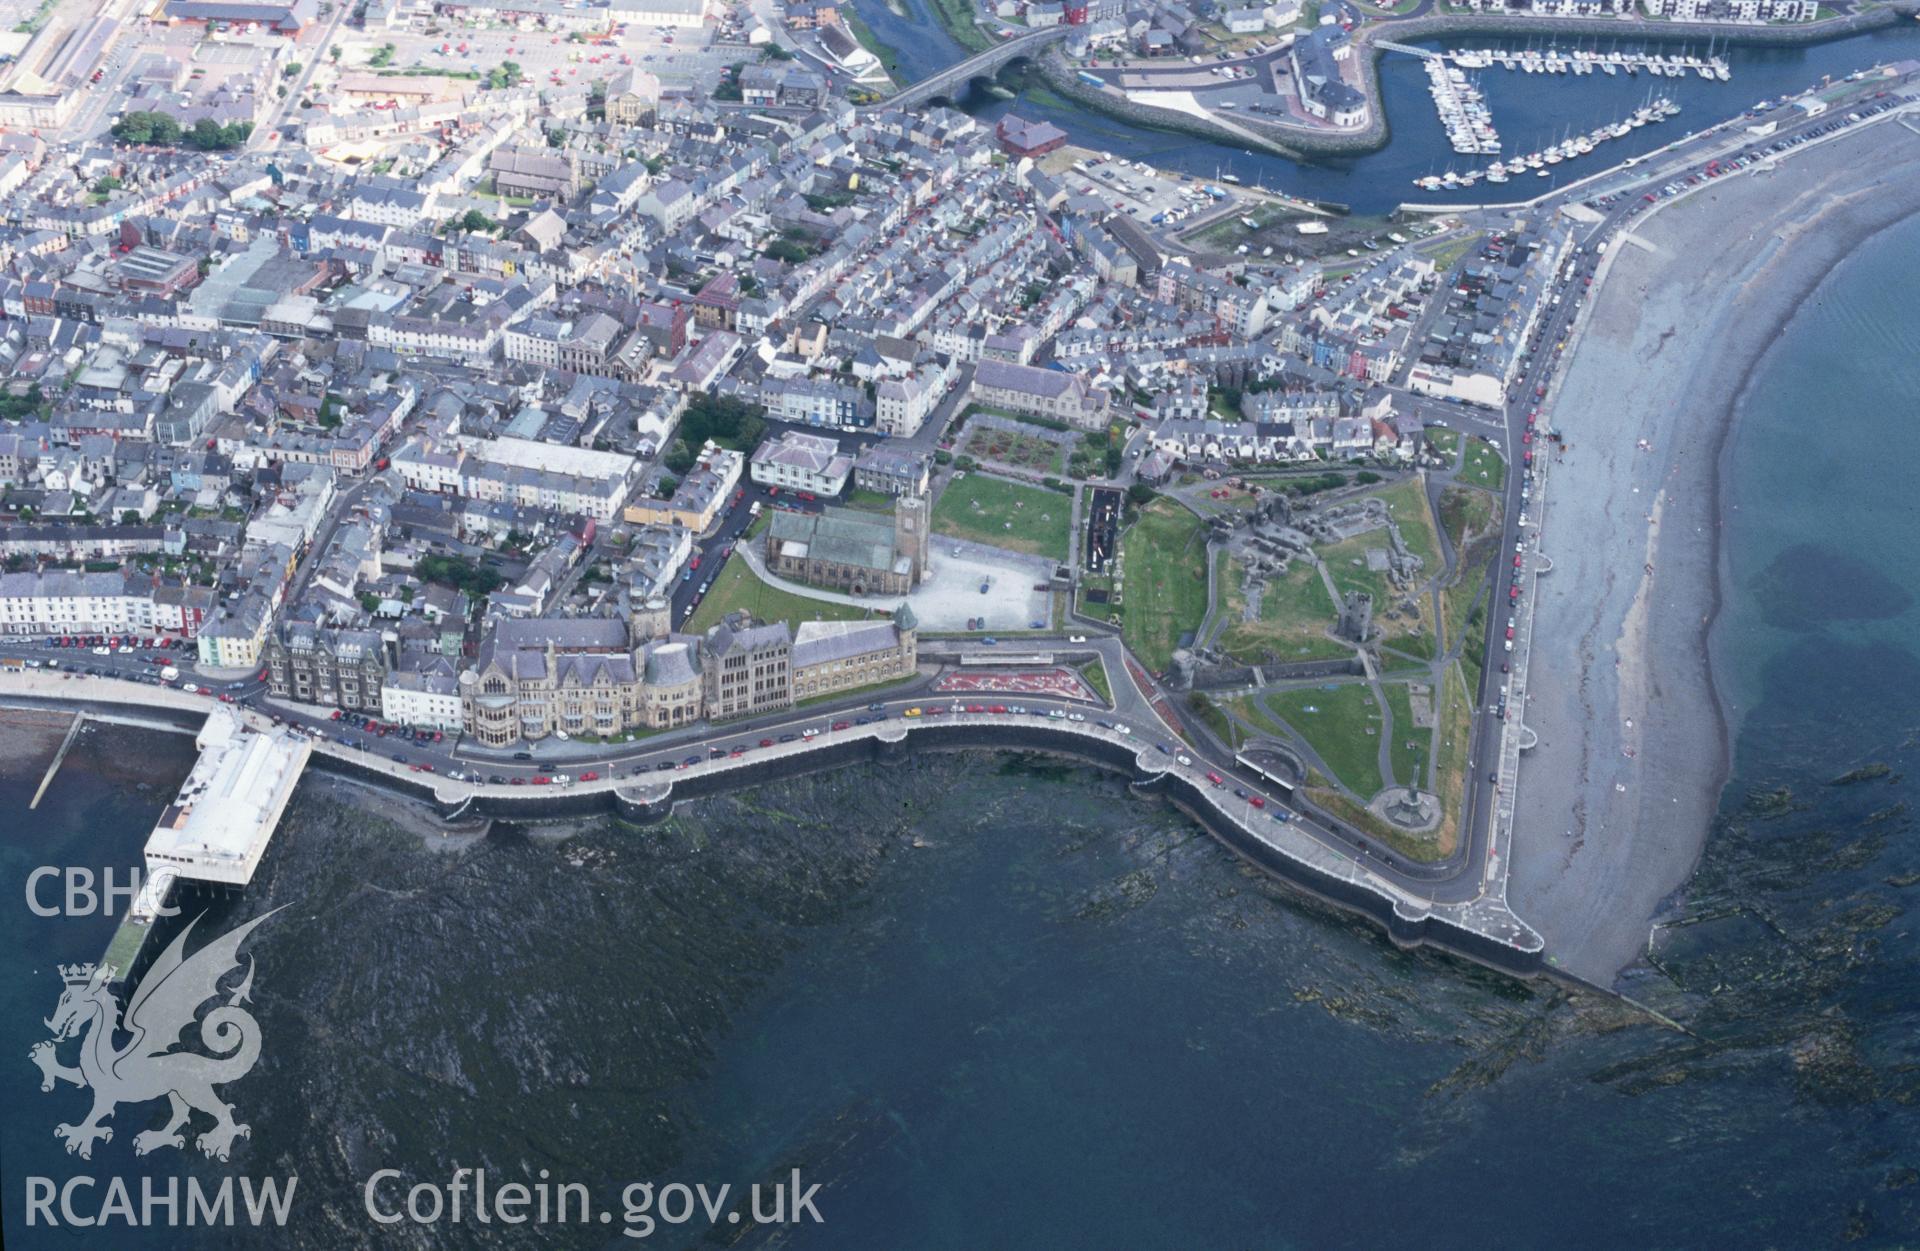 Slide of RCAHMW colour oblique aerial photograph of Aberystwyth, taken by T.G. Driver, 23/7/2000.